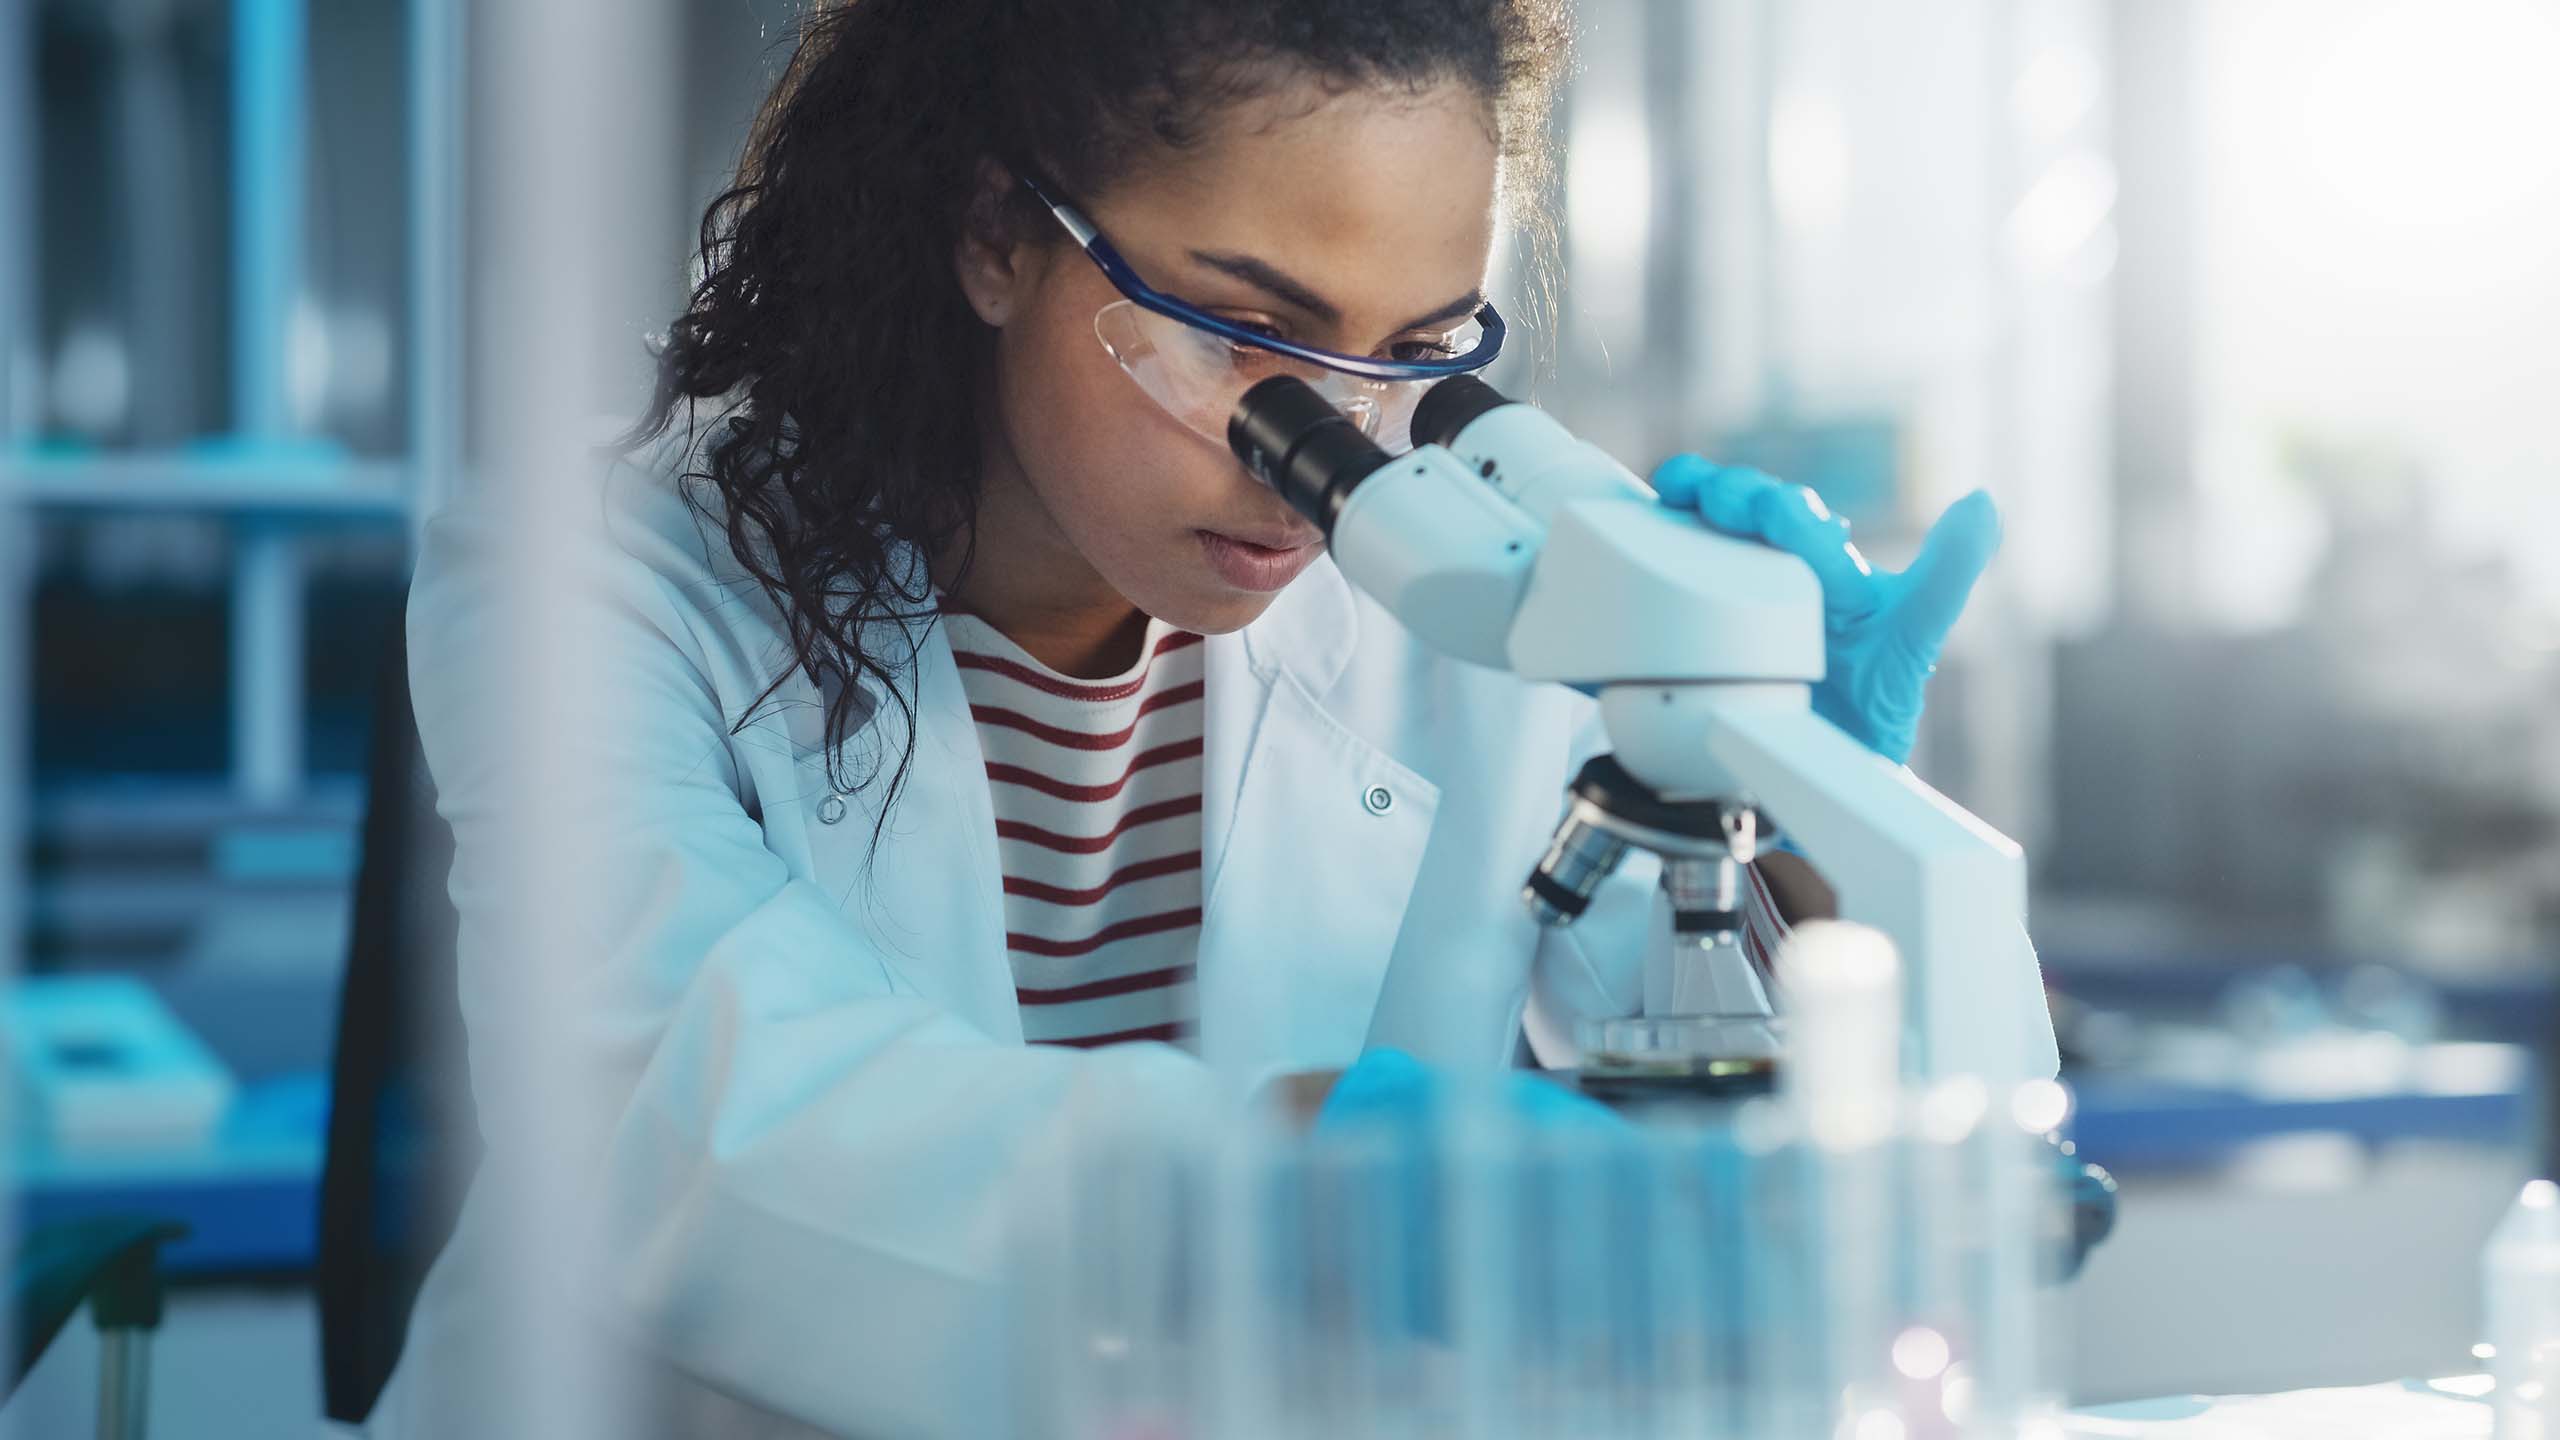 Young female diabetes researcher looks through a microscope in lab